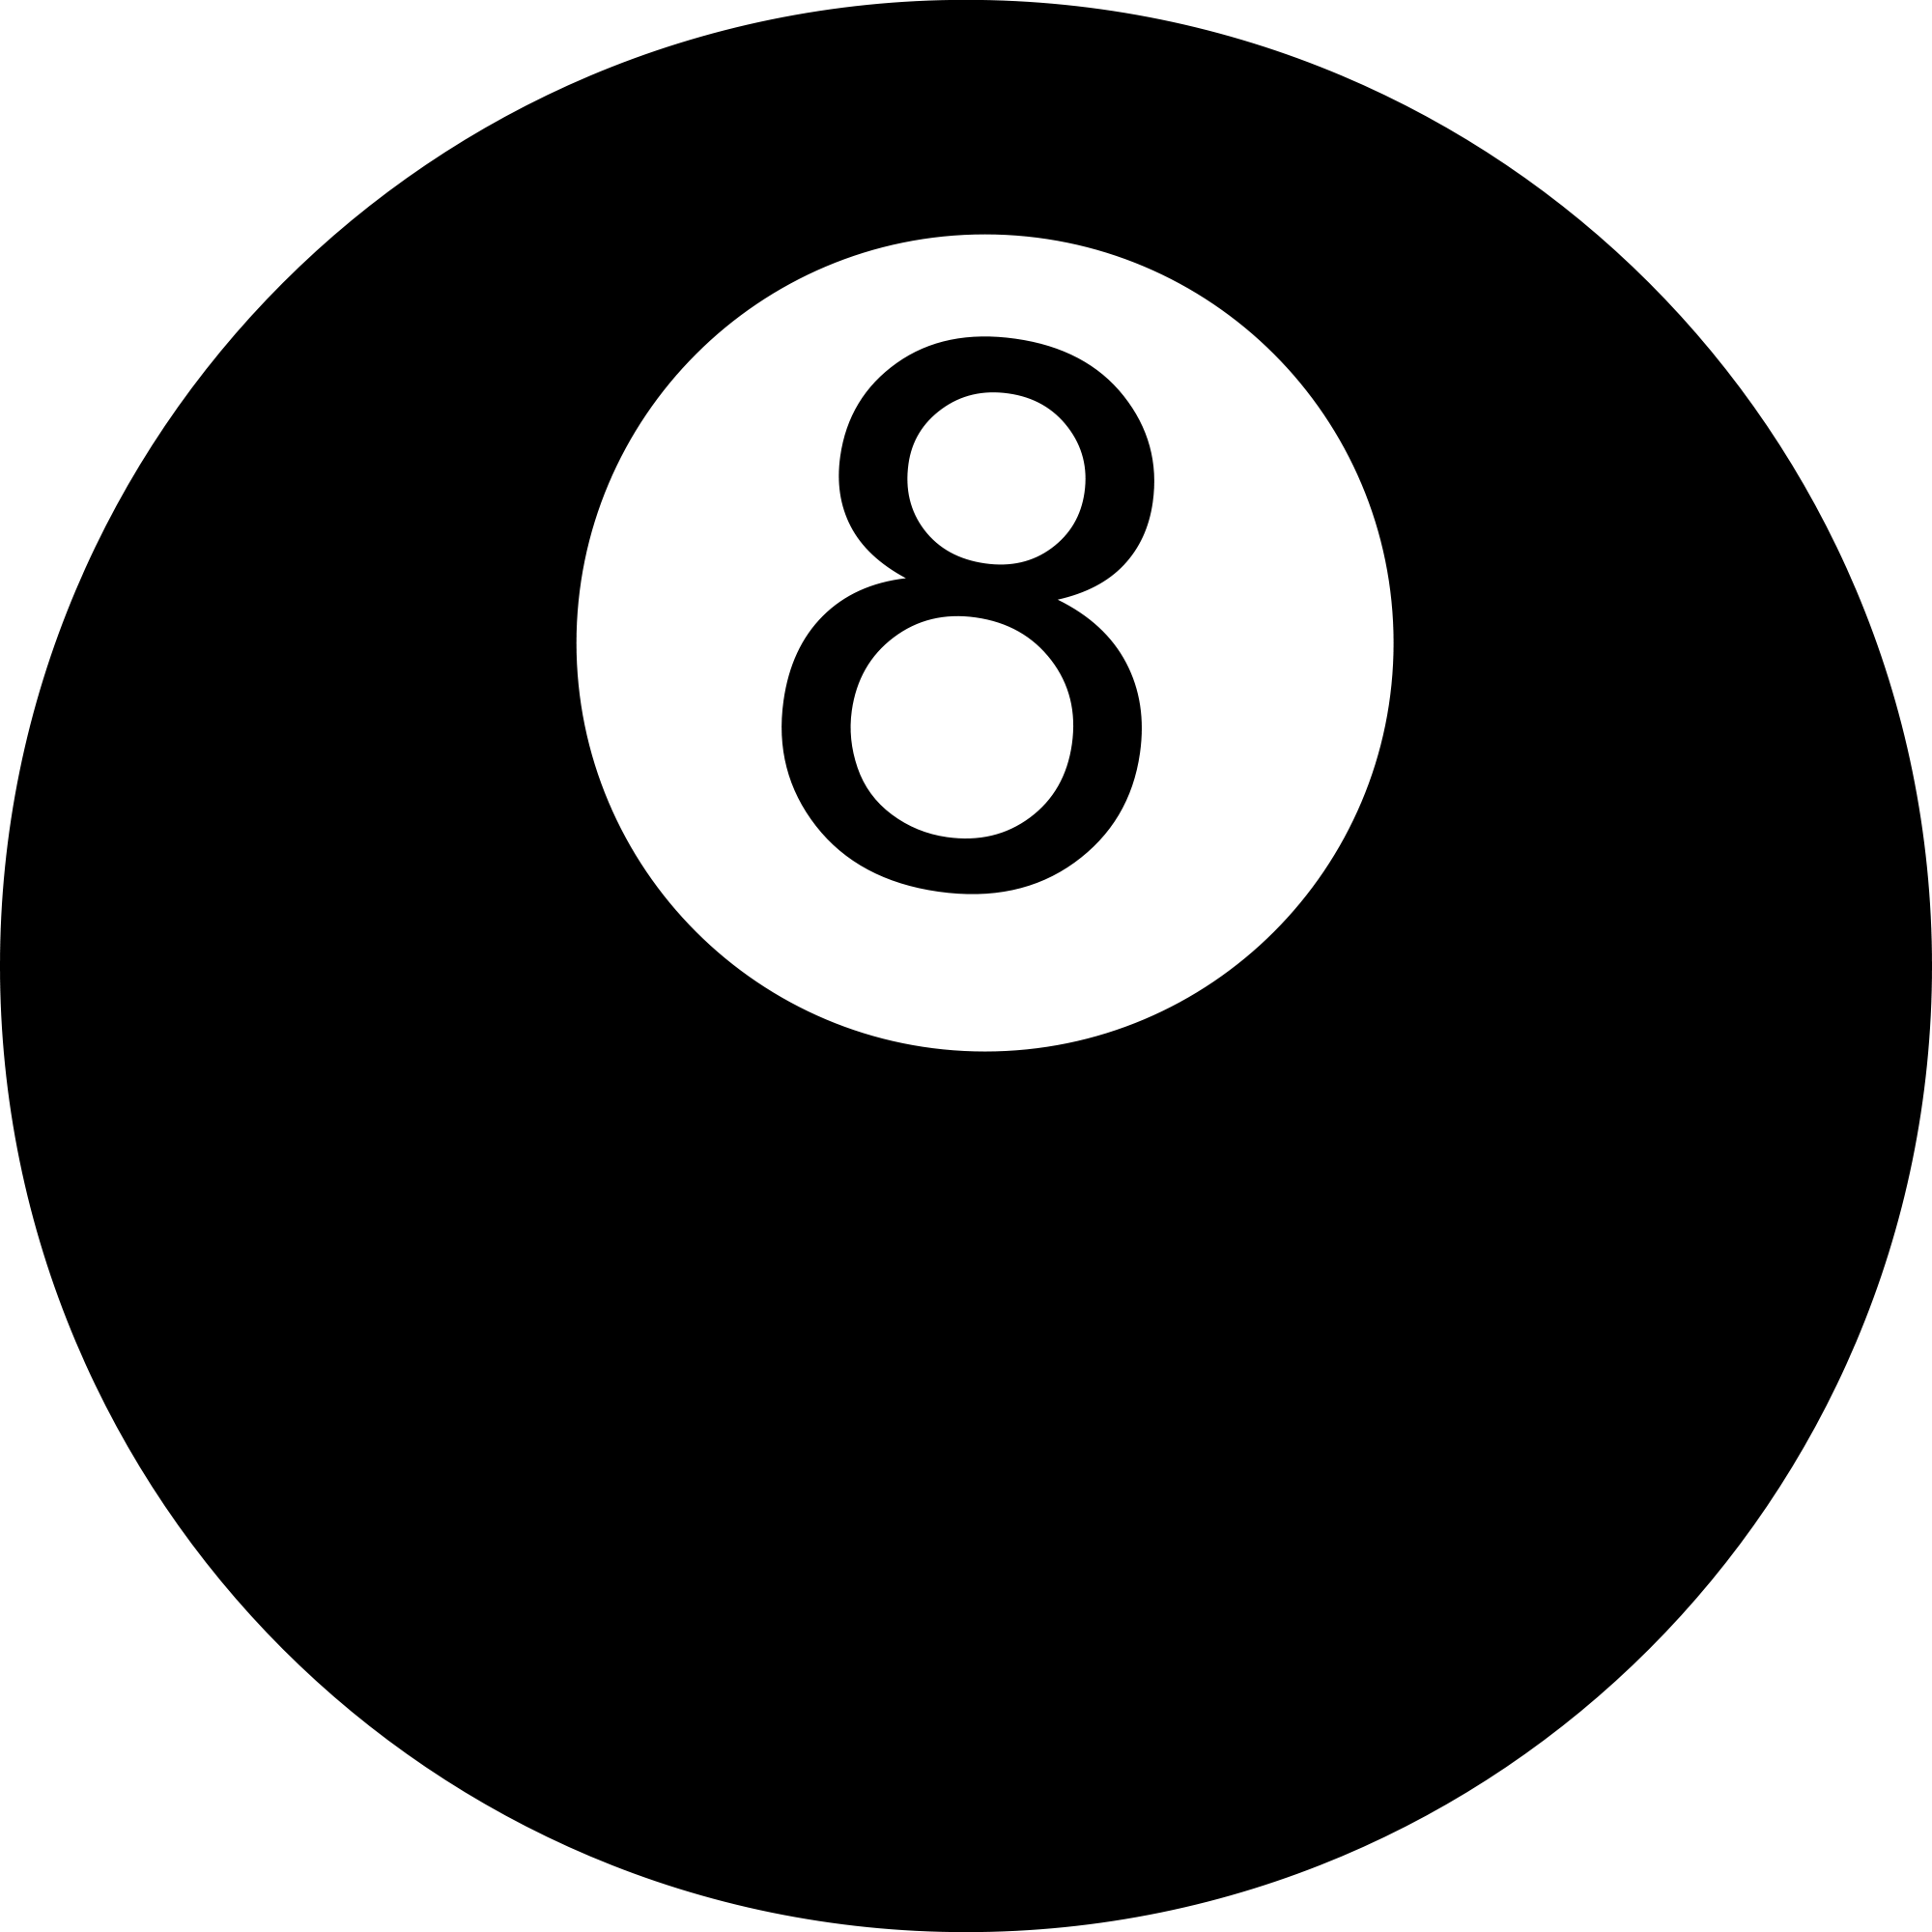 File:8 ball icon.svg - Wikimedia Commons